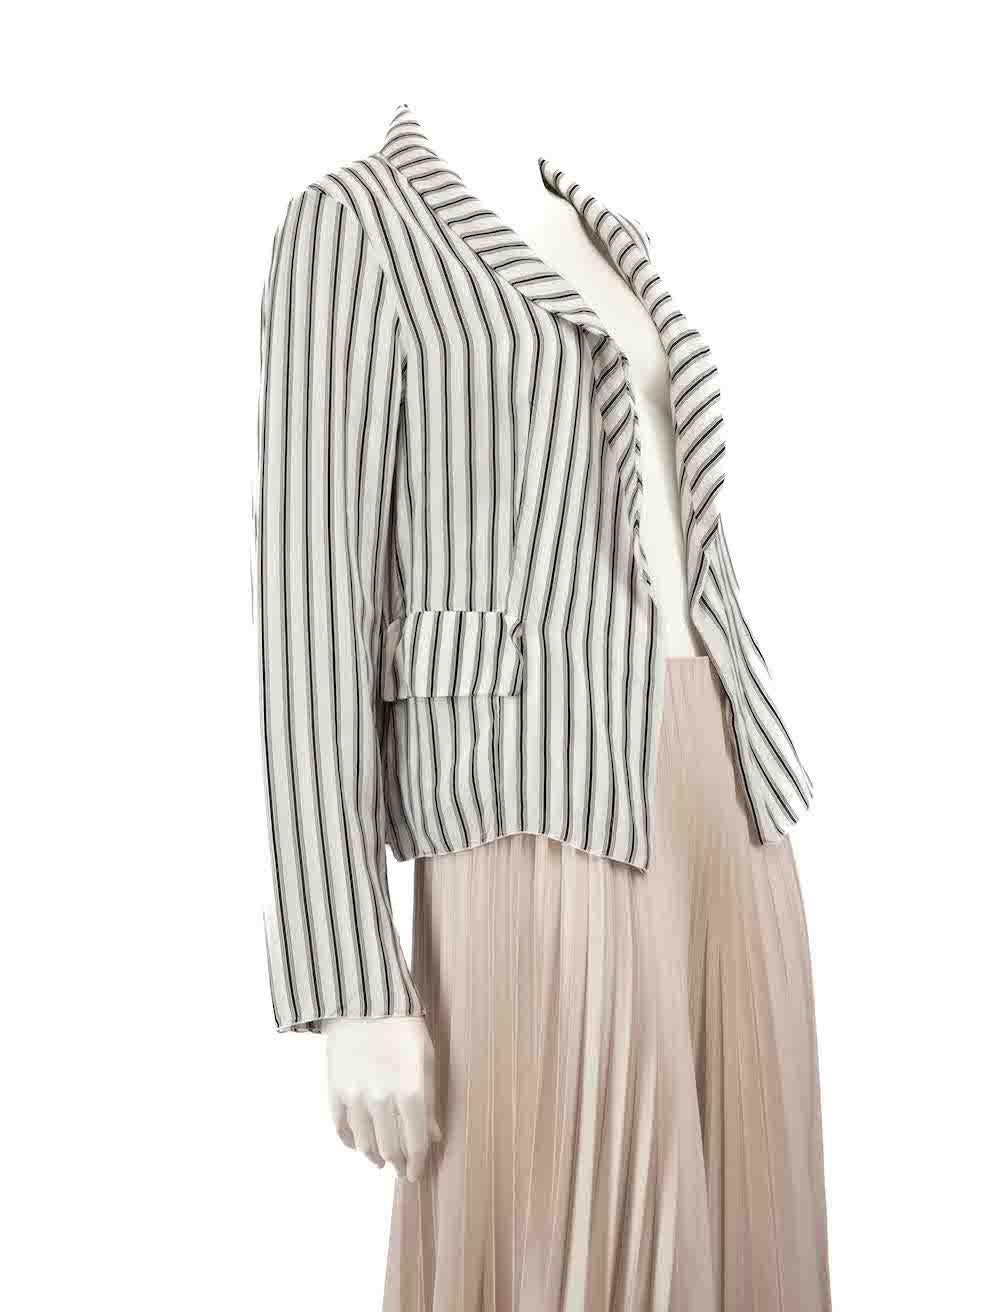 CONDITION is Very good. Hardly any visible wear to the blazer is evident on this used Marni designer resale item.
 
 
 
 Details
 
 
 White and black
 
 Silk
 
 Jacket
 
 Short length
 
 Striped pattern
 
 Open front
 
 2x Front side pockets
 
 
 
